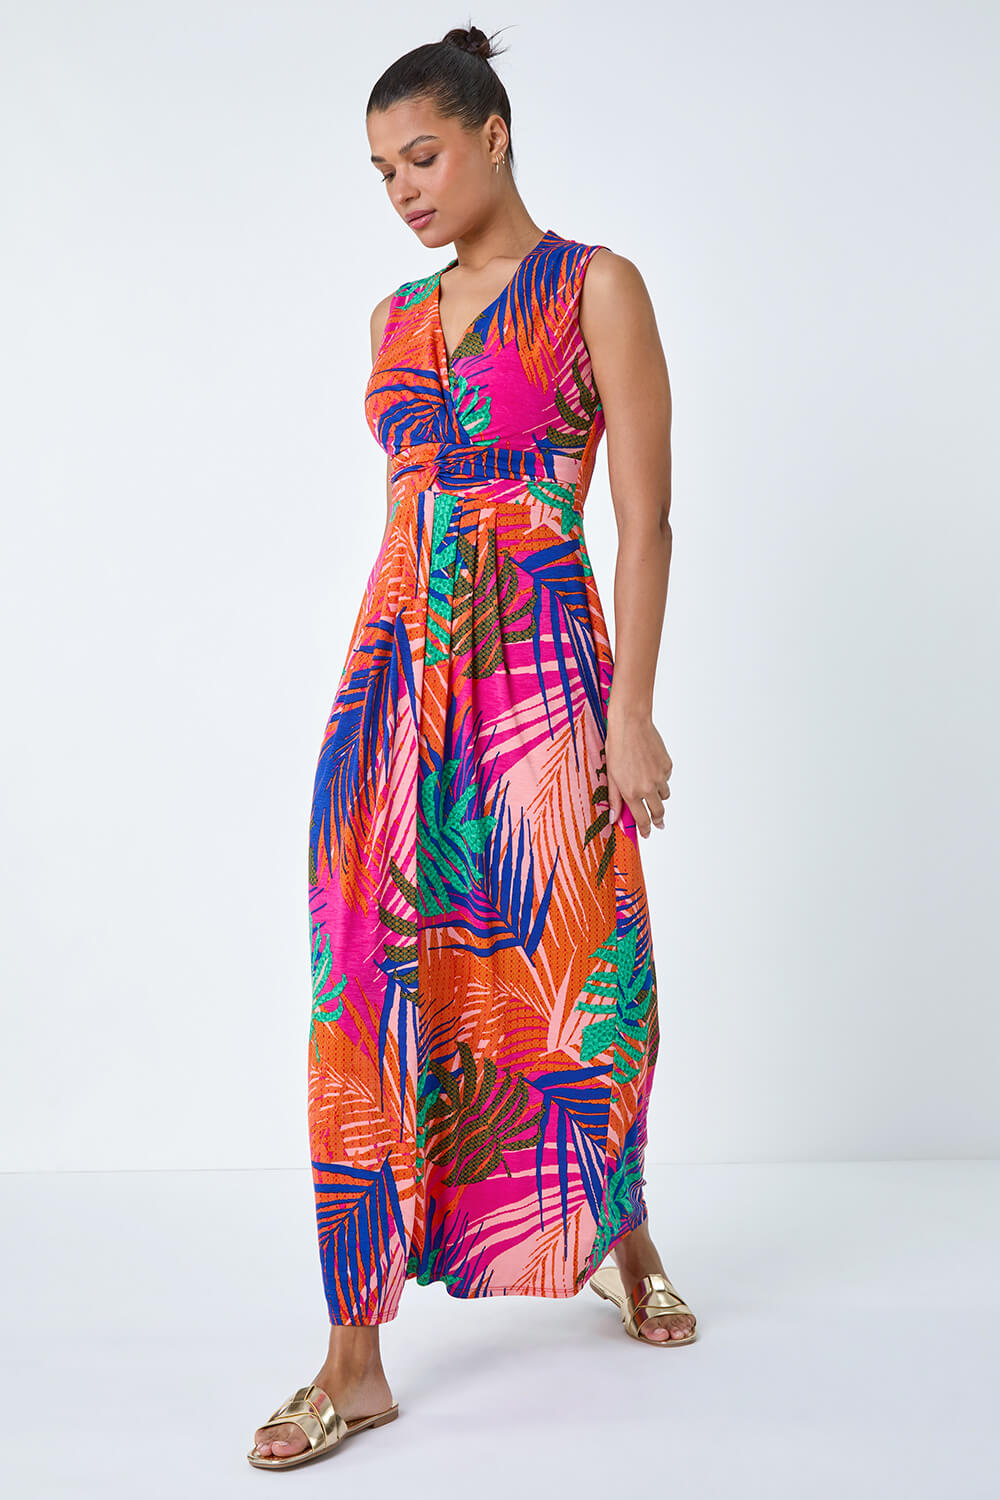 PINK Tropical Gathered Stretch Maxi Dress, Image 3 of 5